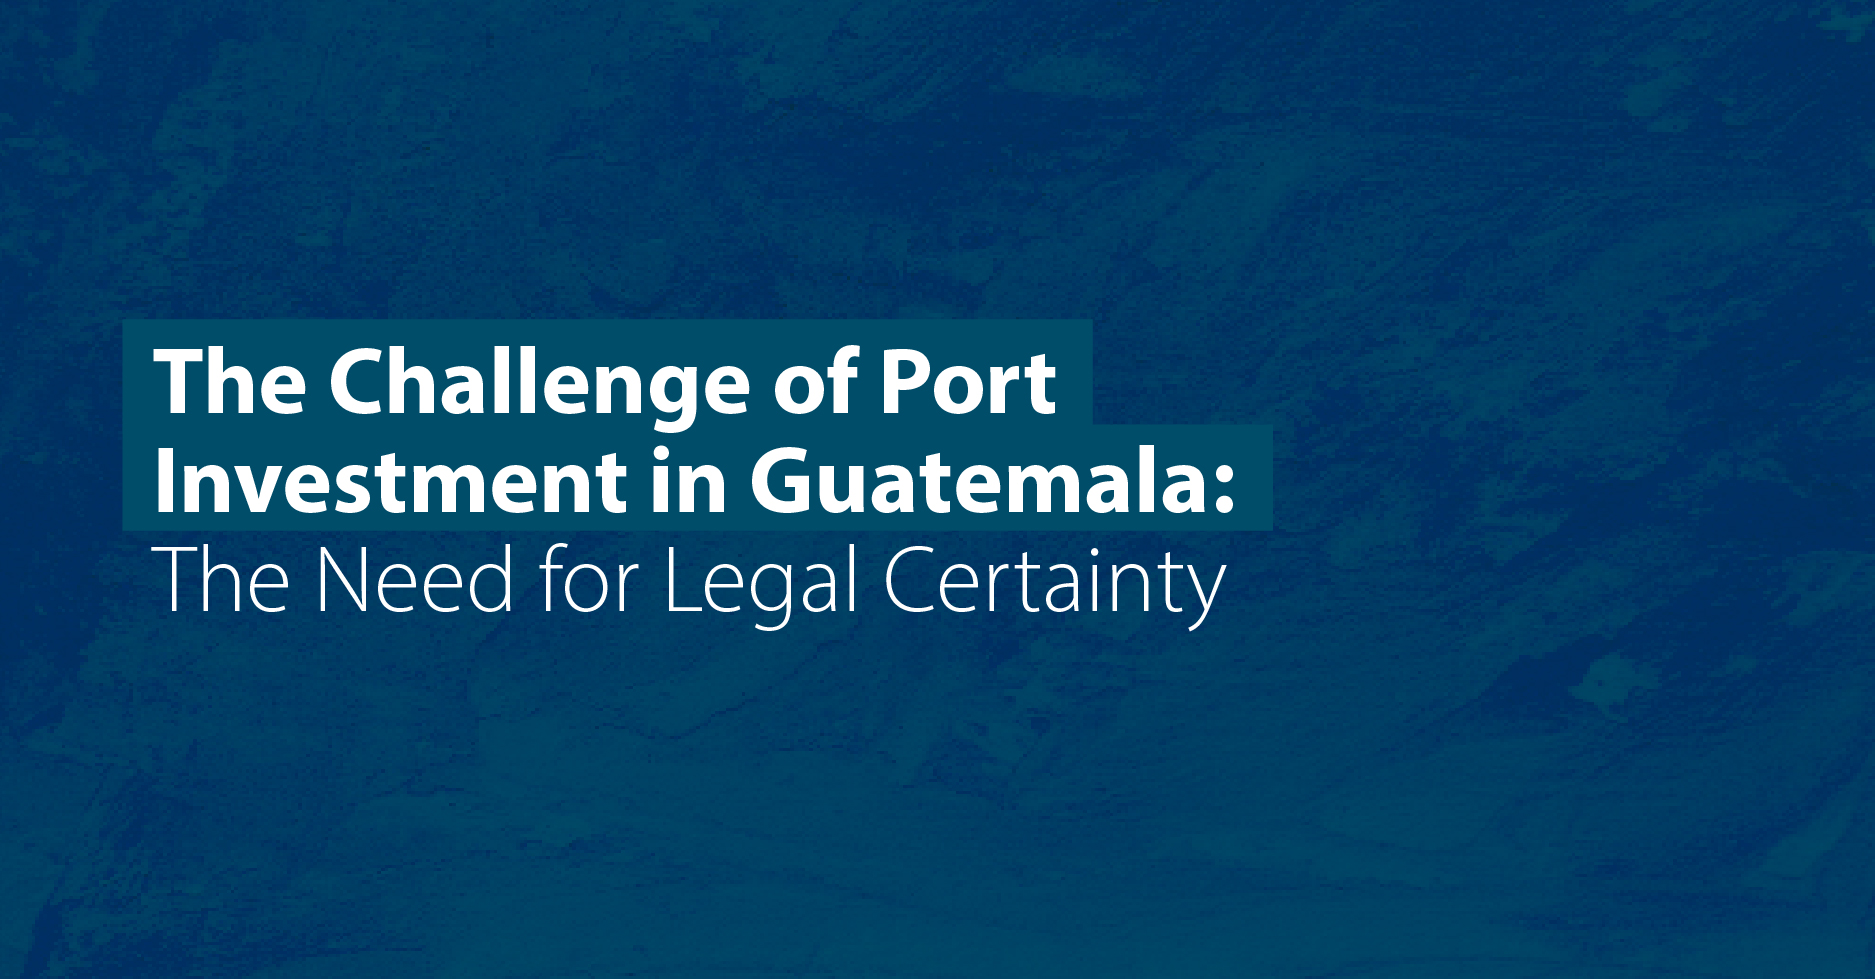 The Challenge of Port Investment in Guatemala: The Need for Legal Certainty